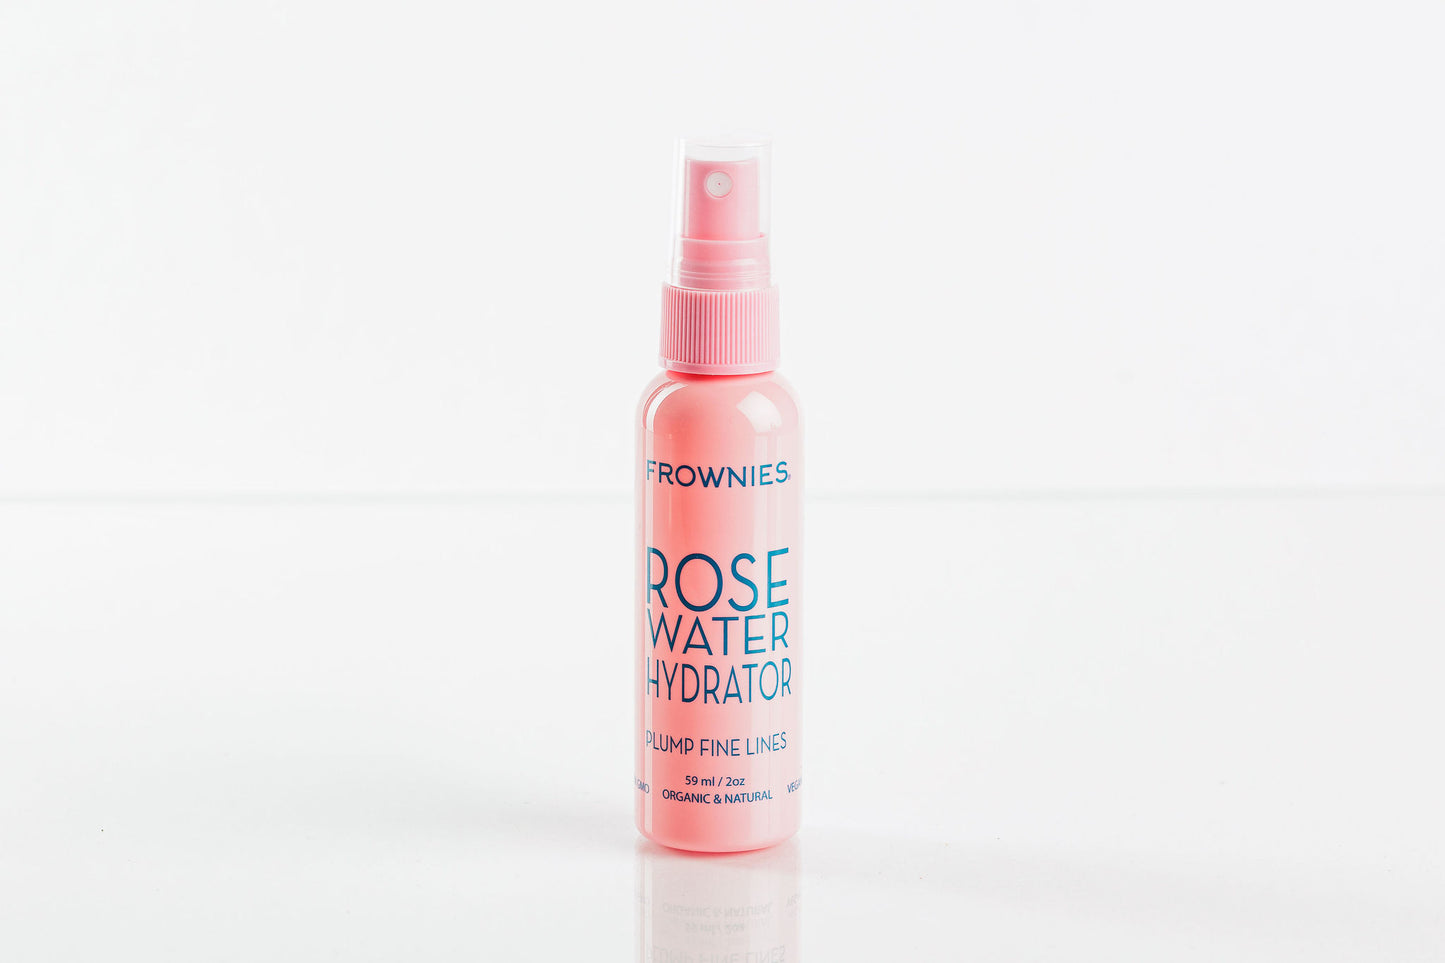 frownies rose water hydrator pink spray bottle The Frownies   